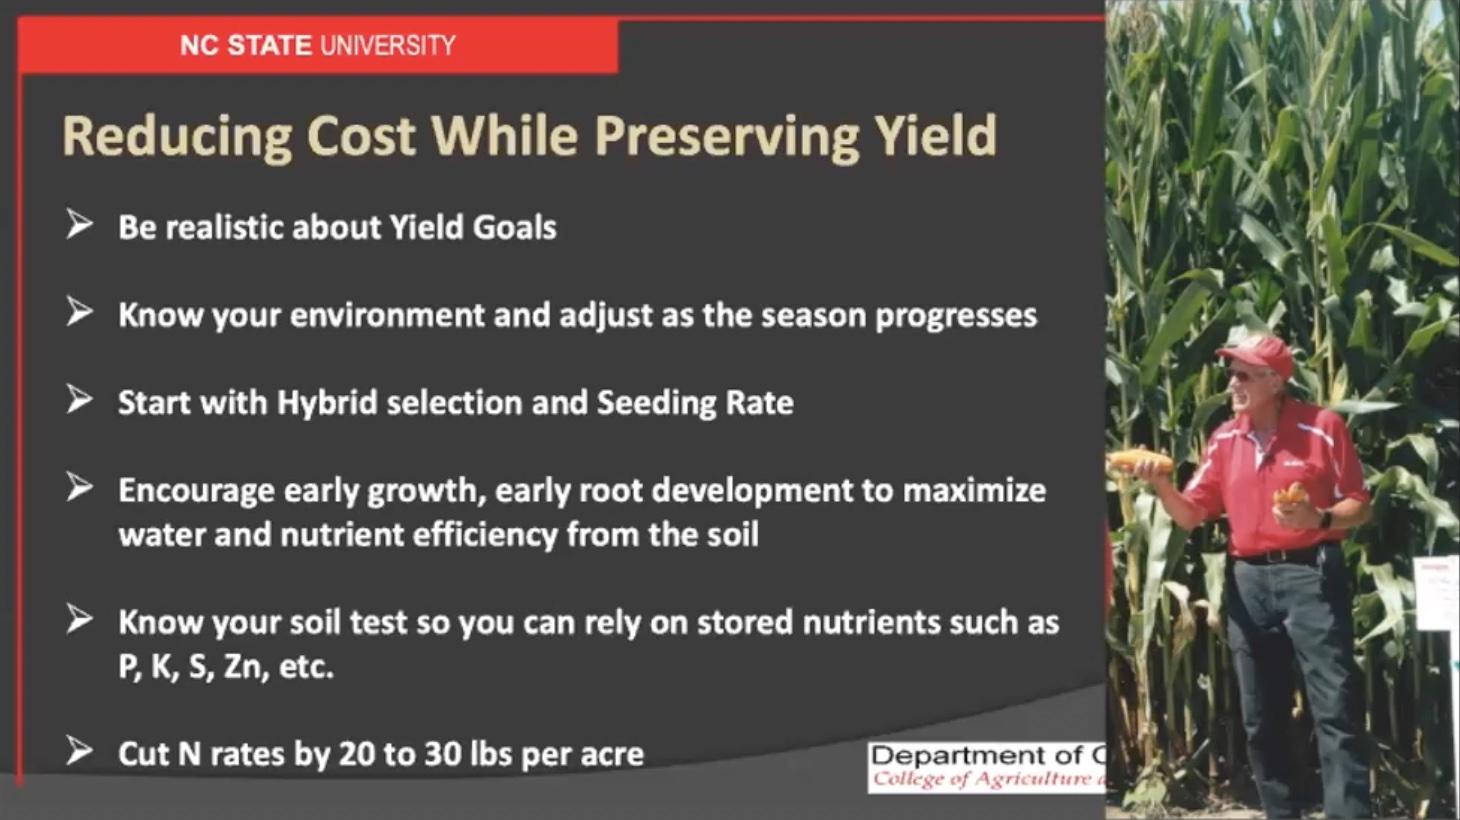 PowerPoint about reducing costs while preserving yield in corn